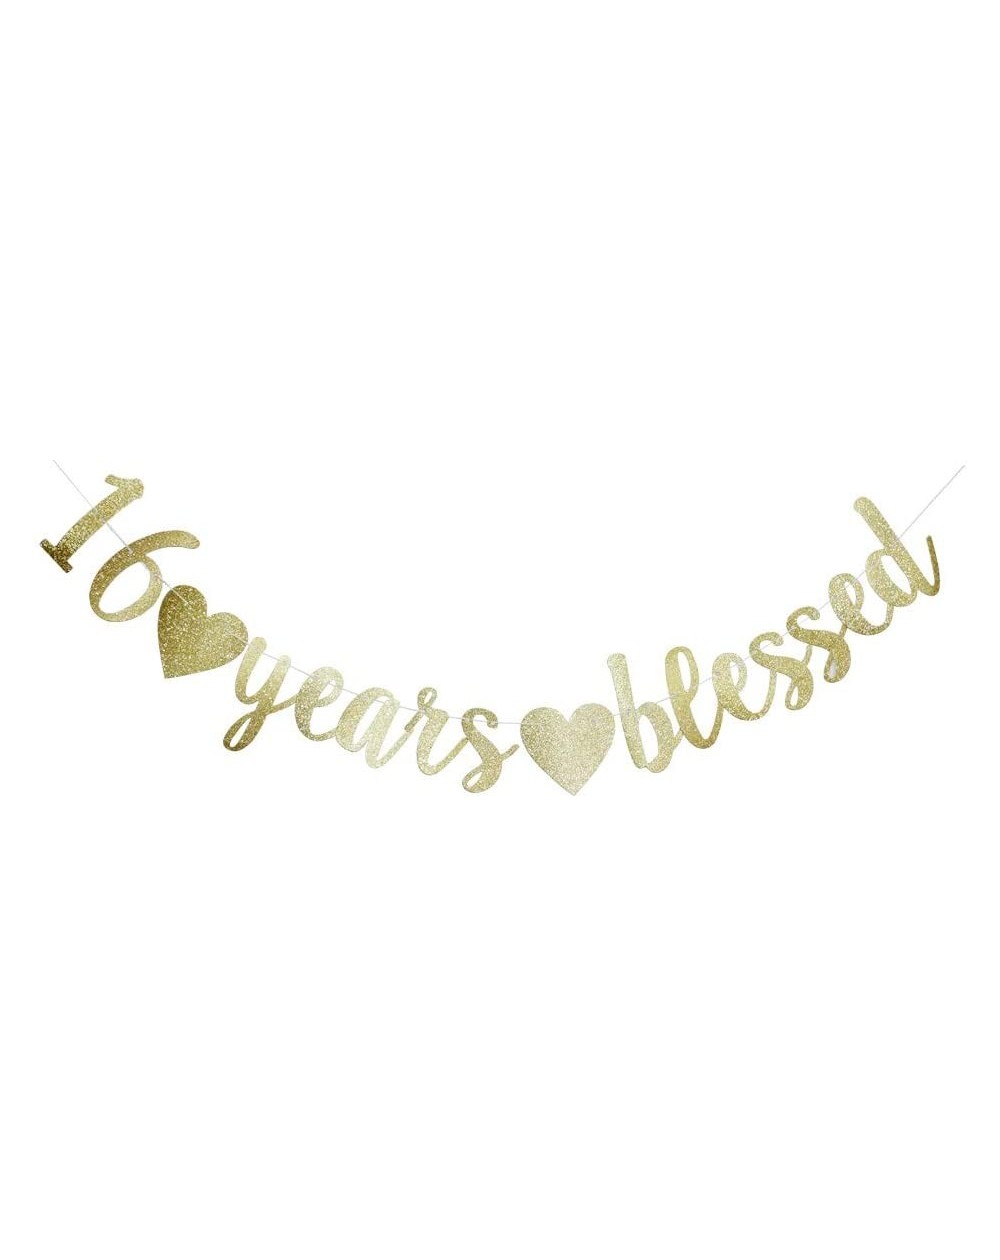 Banners & Garlands 16 Years Blessed Banner- Funny Gold Glitter Sign for 16th Birthday/Wedding Anniversary Party Supplies Phot...